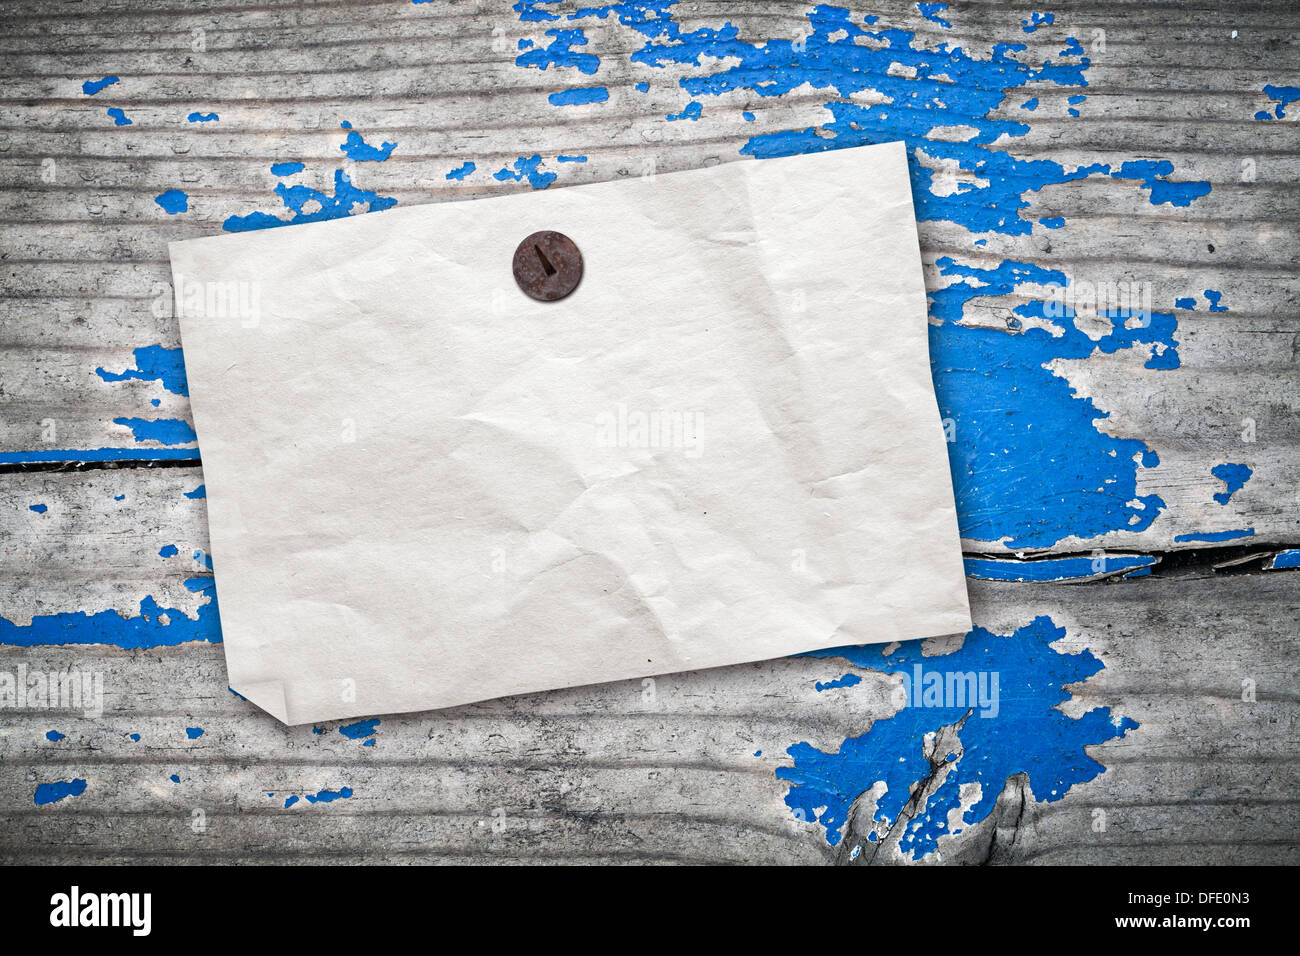 Empty paper ad hanging on vintage wooden wall with blue paint Stock Photo